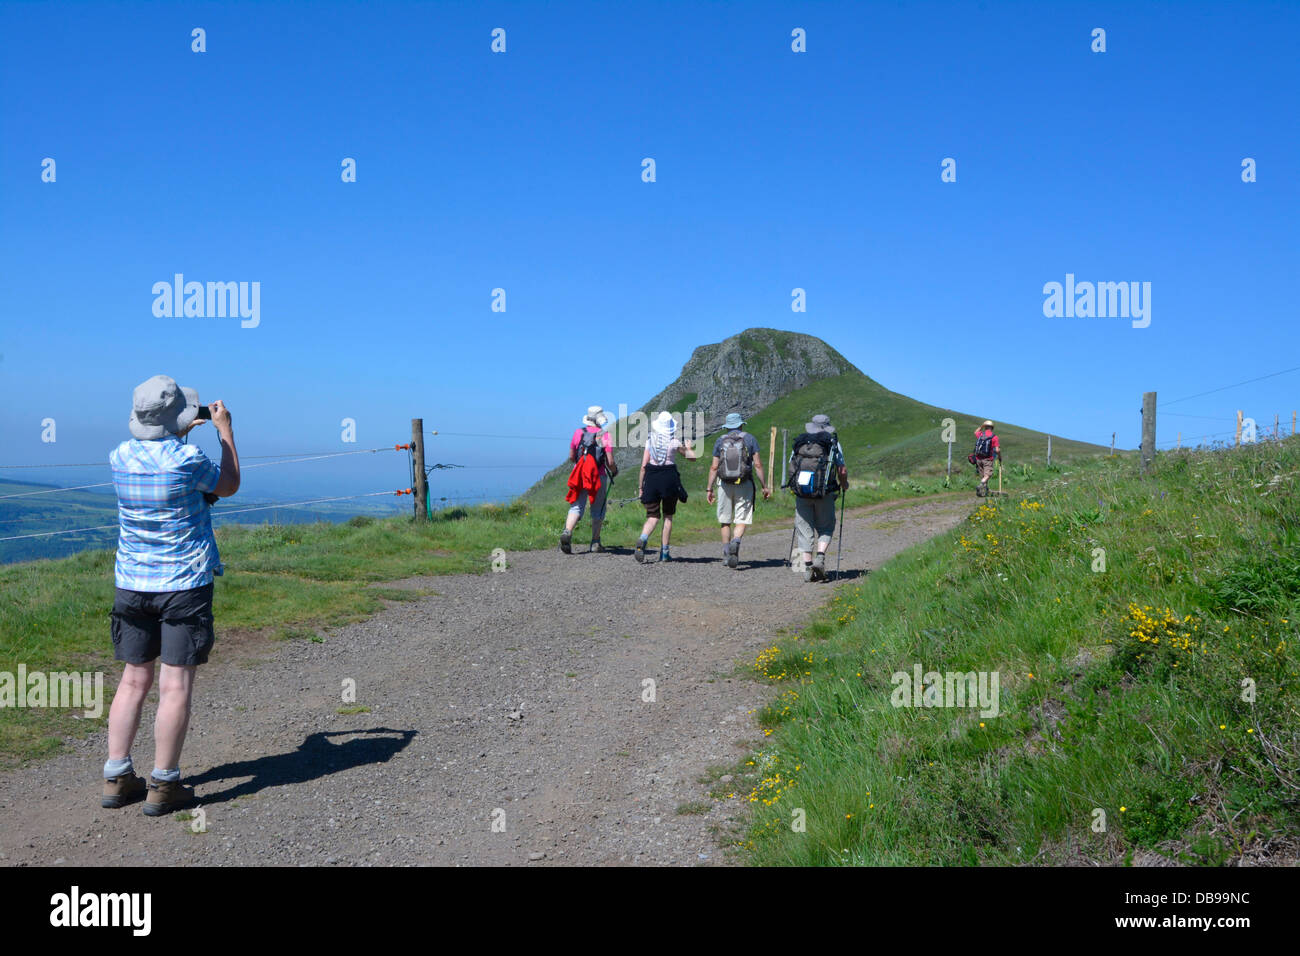 Ramblers walking in  countryside. Banne d'Ordanche. Auvergne. France. Stock Photo